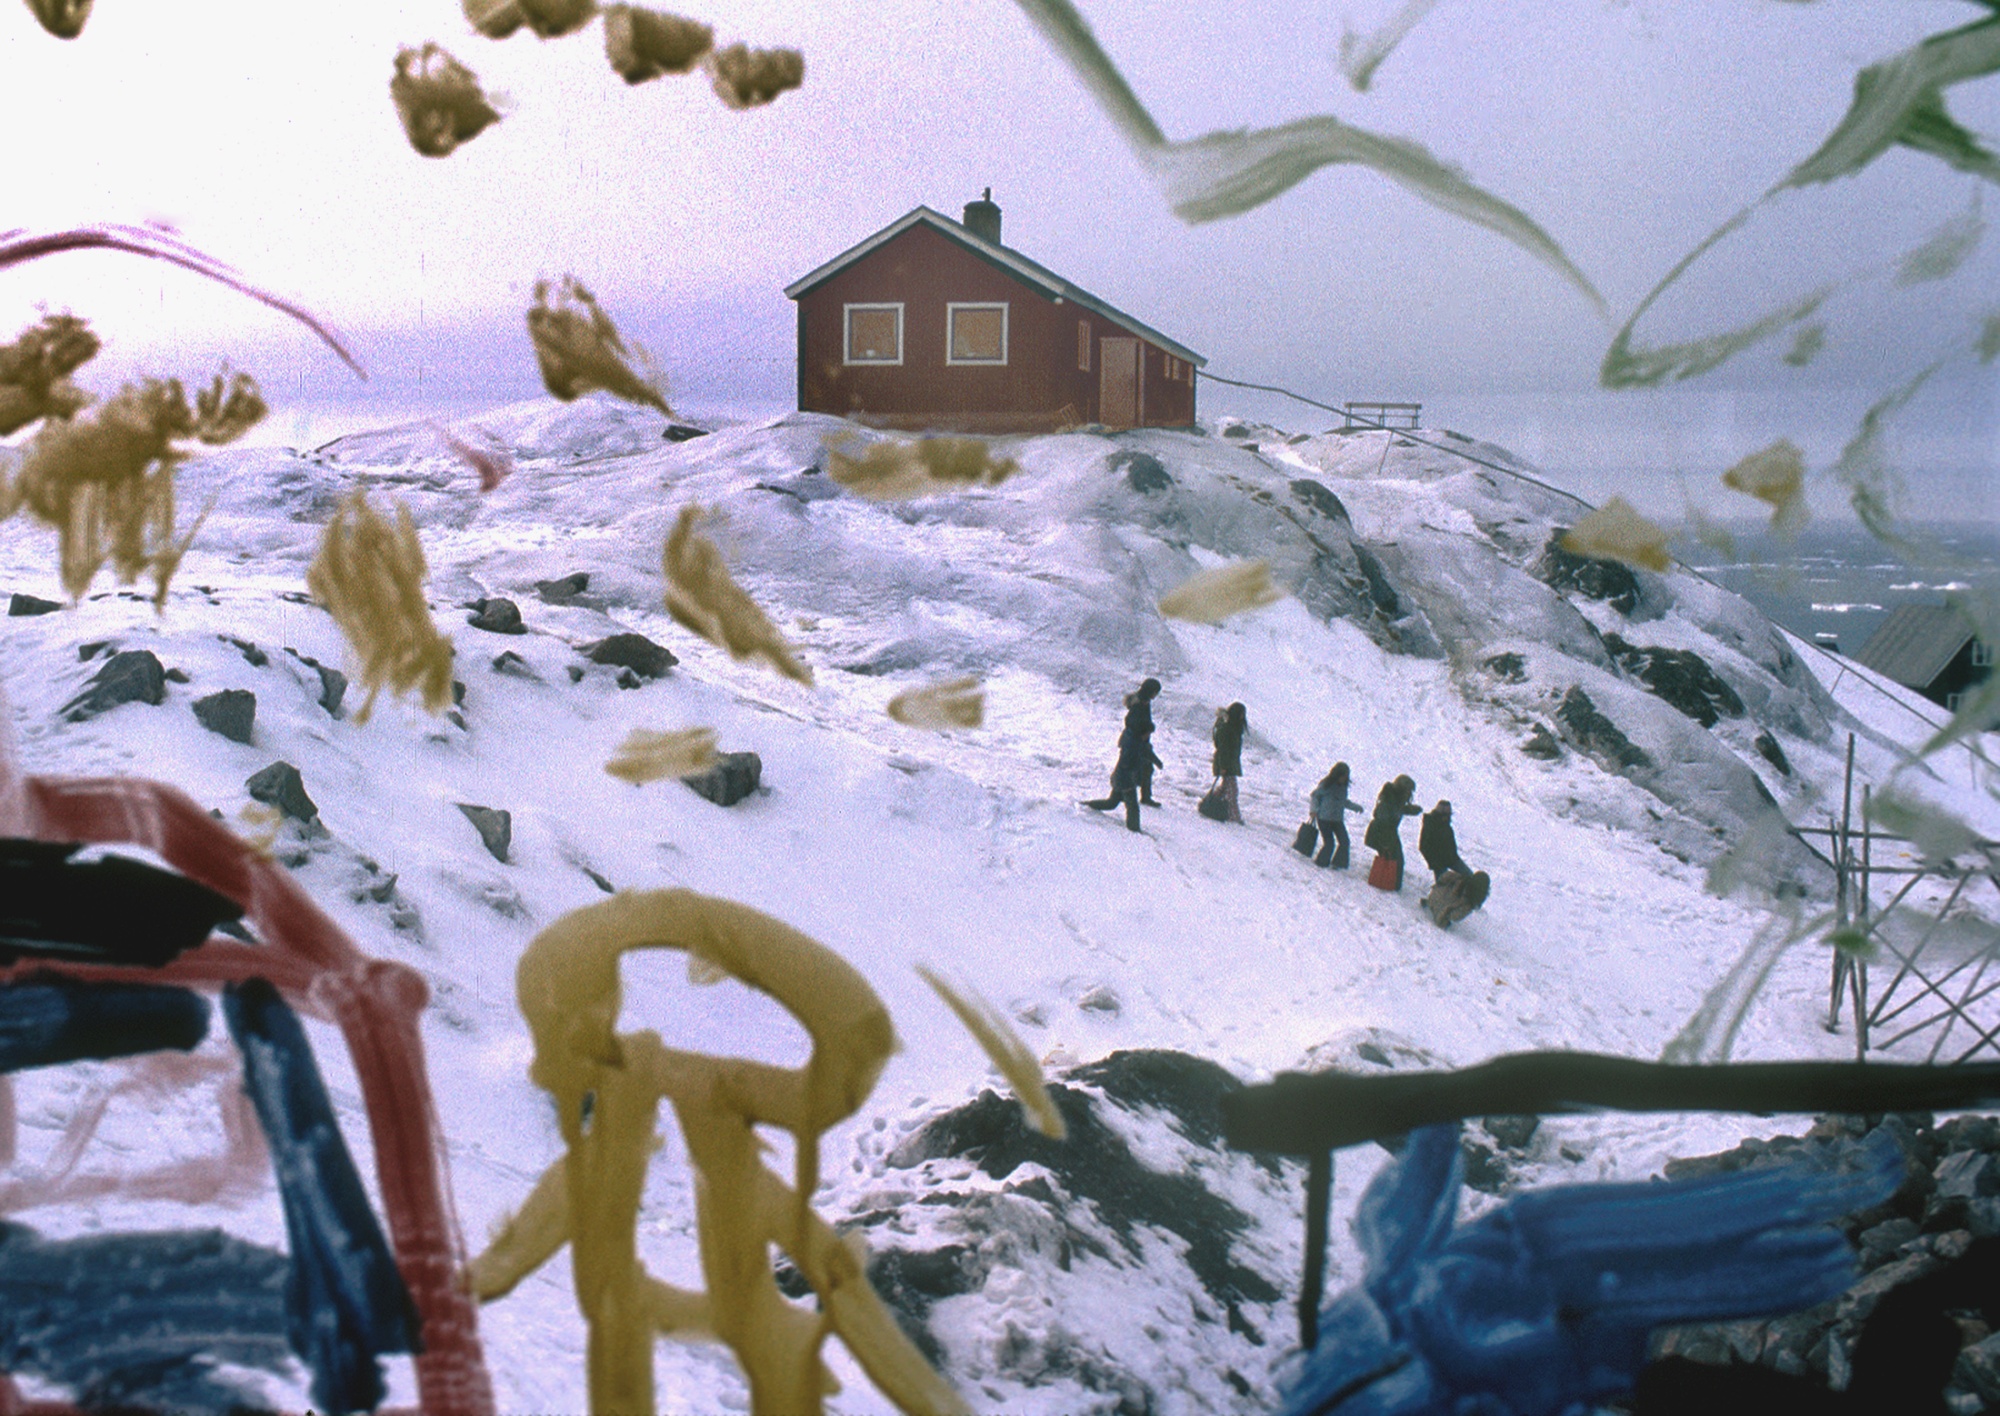 The Greenland town of Ilulissat, then known as Jacobshaven, in 1972. Thousands of Inuit women and girls were fitted with coils by the Danish government to curb population growth in its former colony.